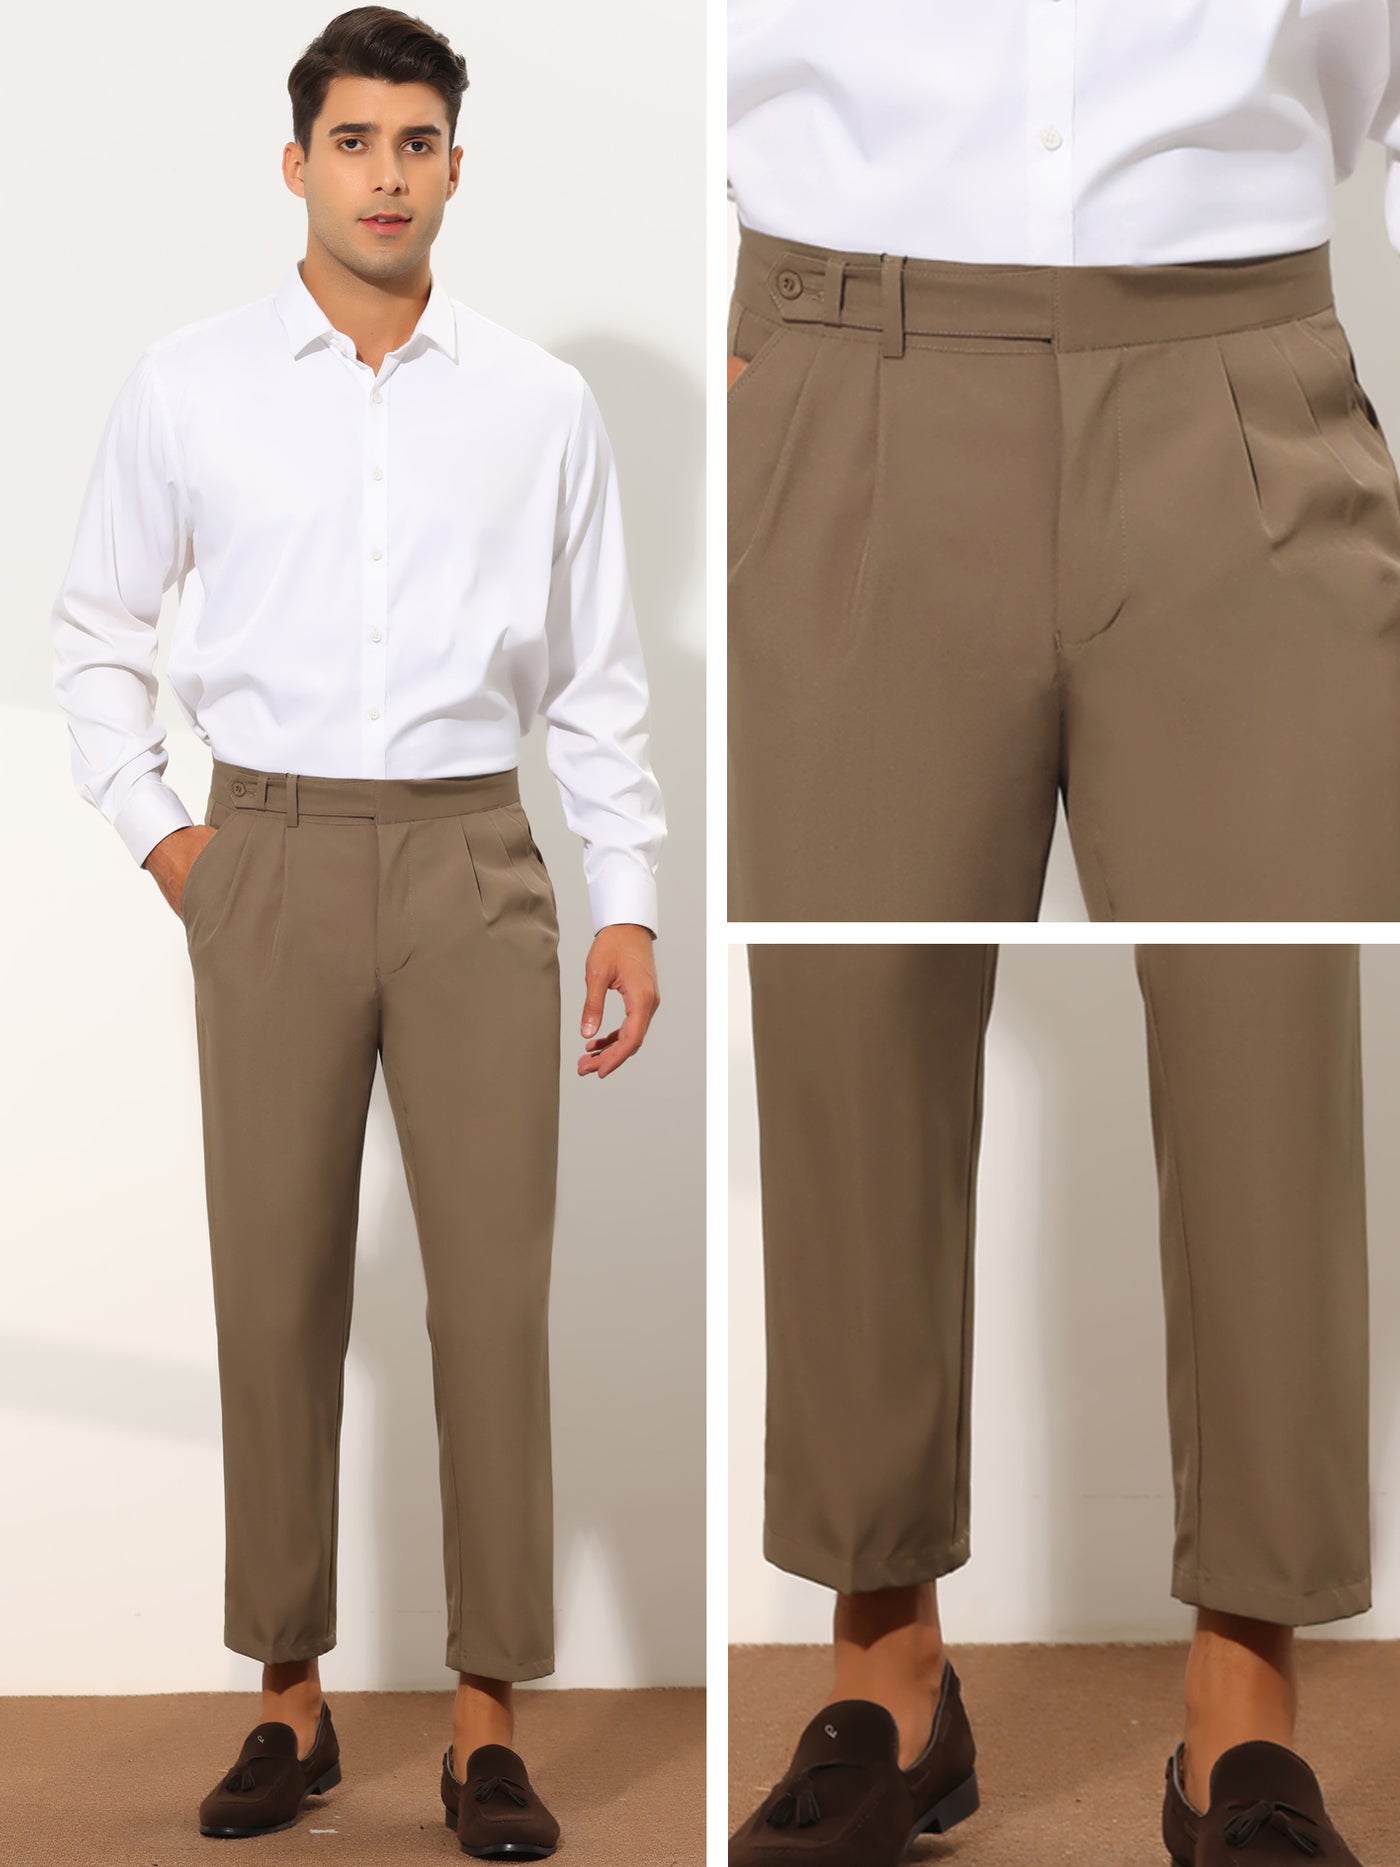 Bublédon Cropped Dress Pants for Men's Slim Fit Pleated Front Solid Business Chino Trousers